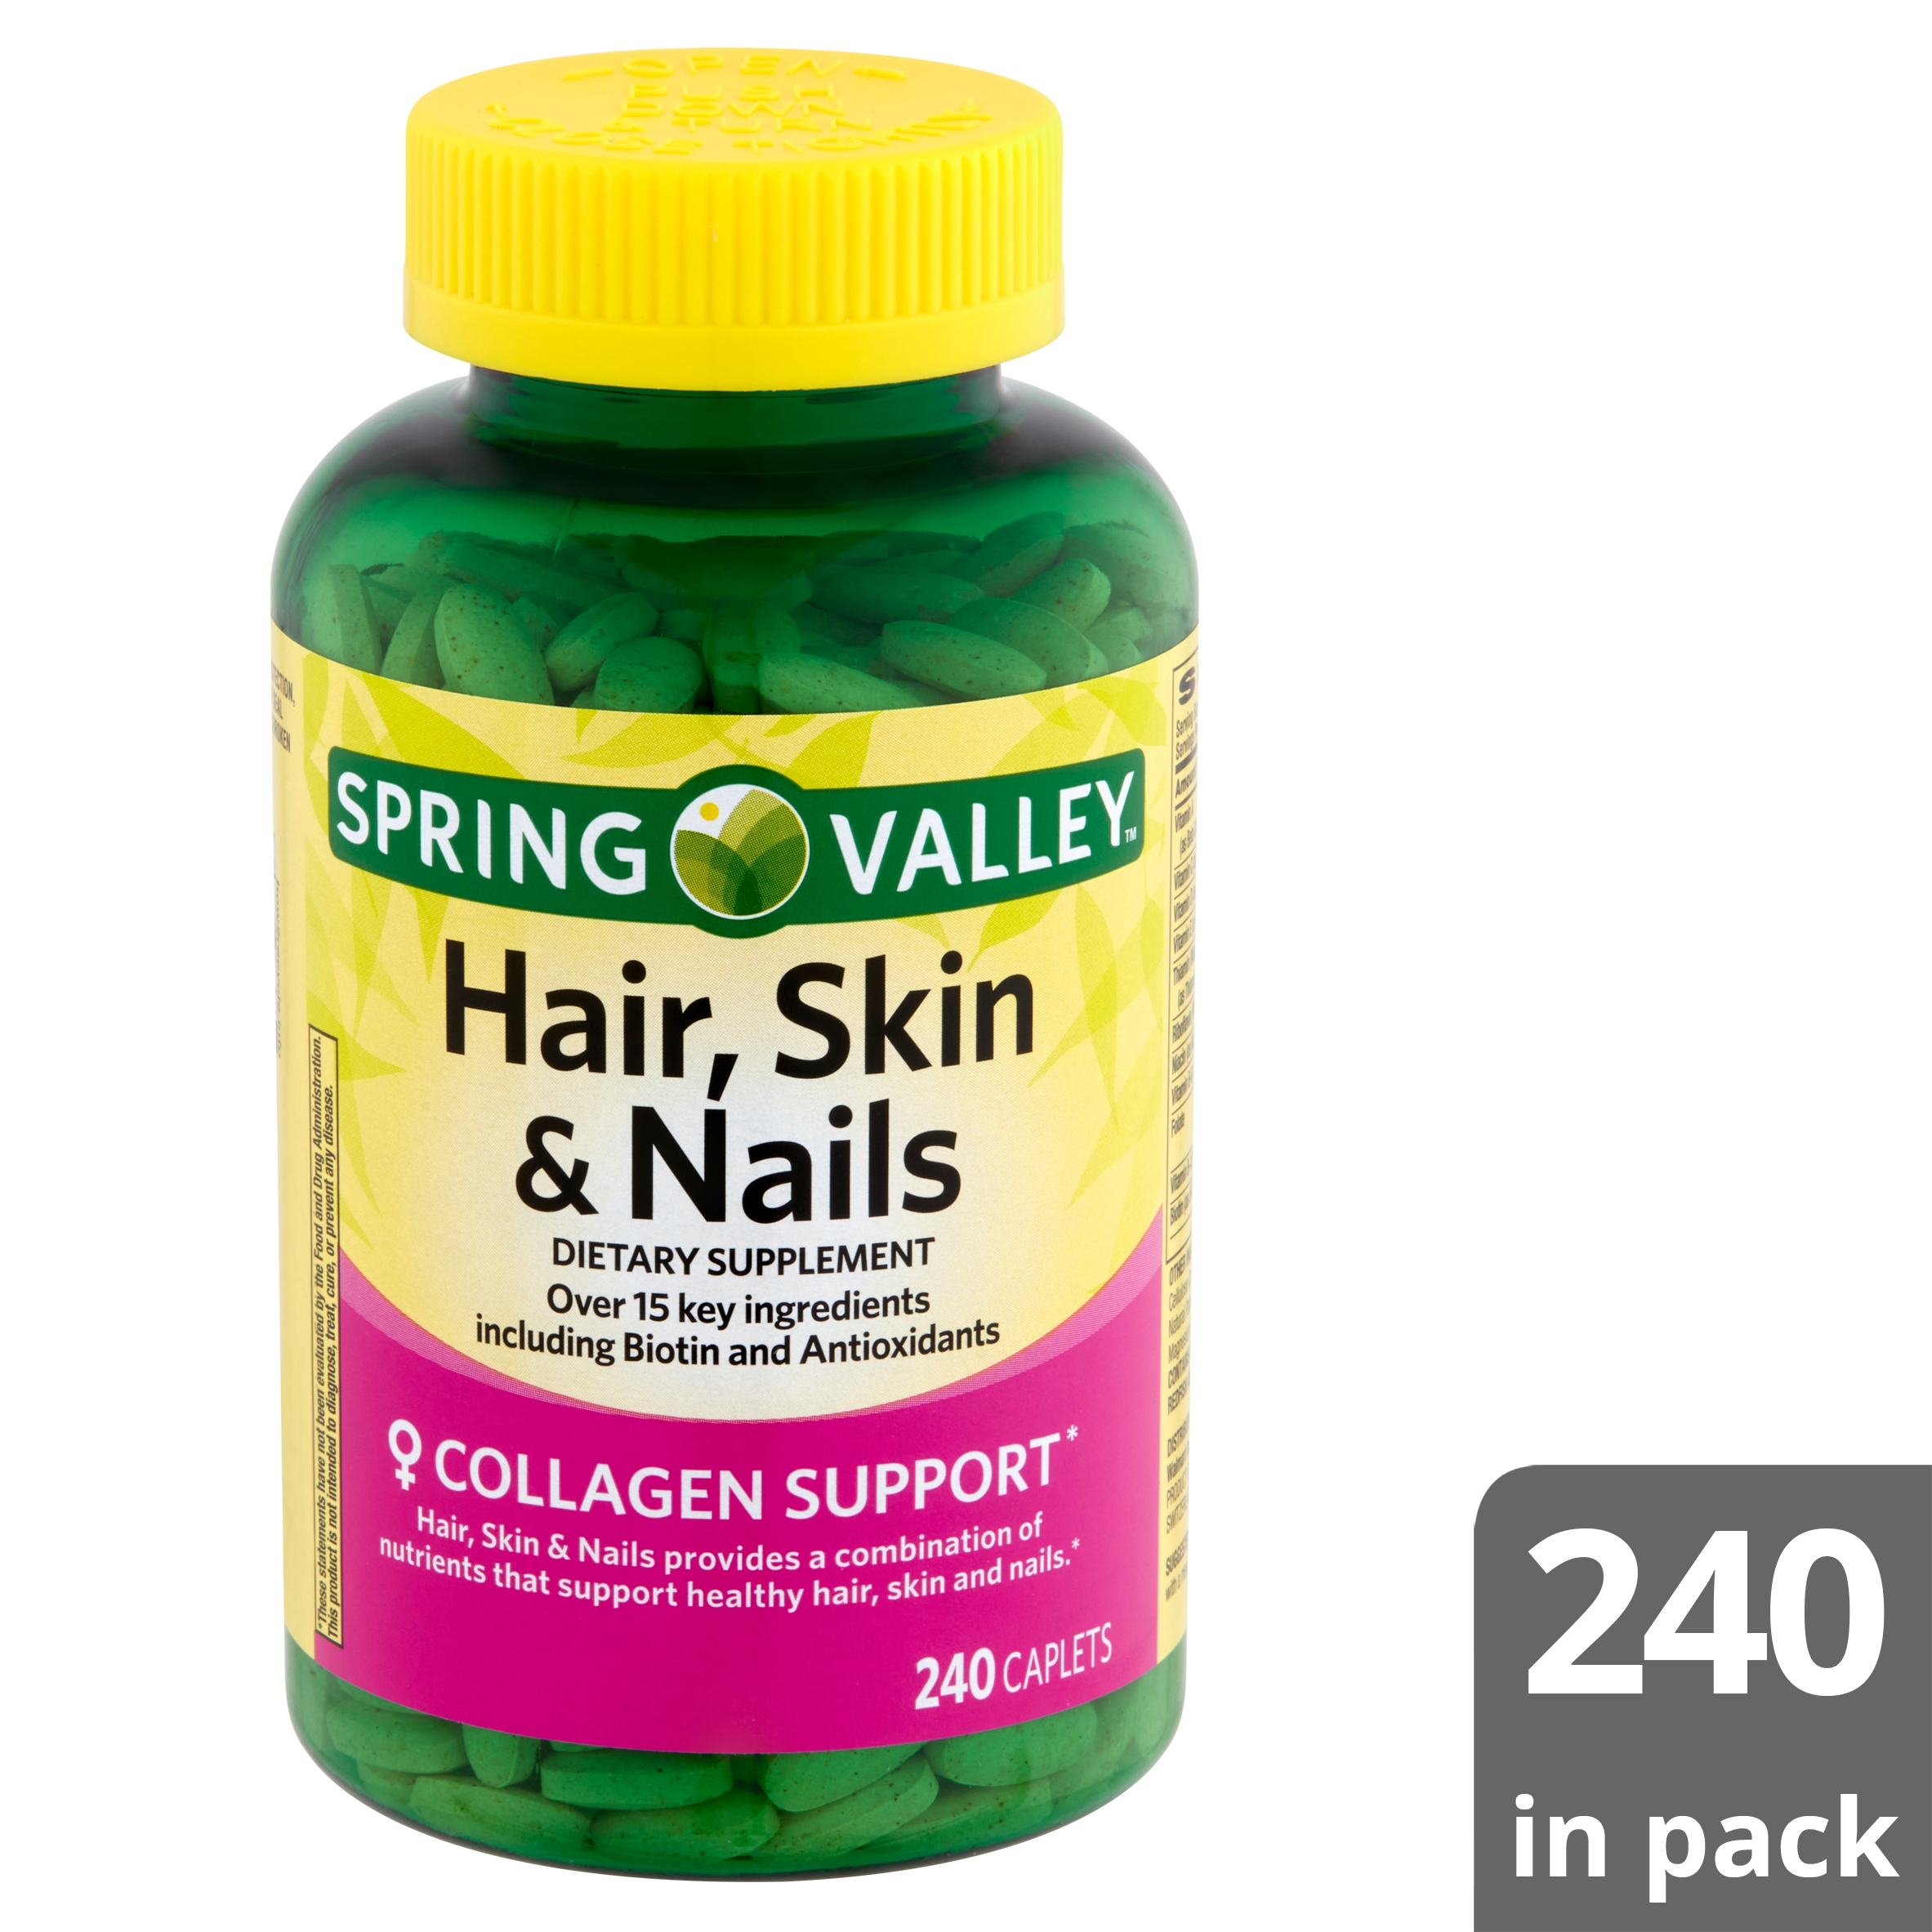 Spring Valley Hair, Skin & Nails Dietary Supplement, 240 Caplets - image 2 of 9